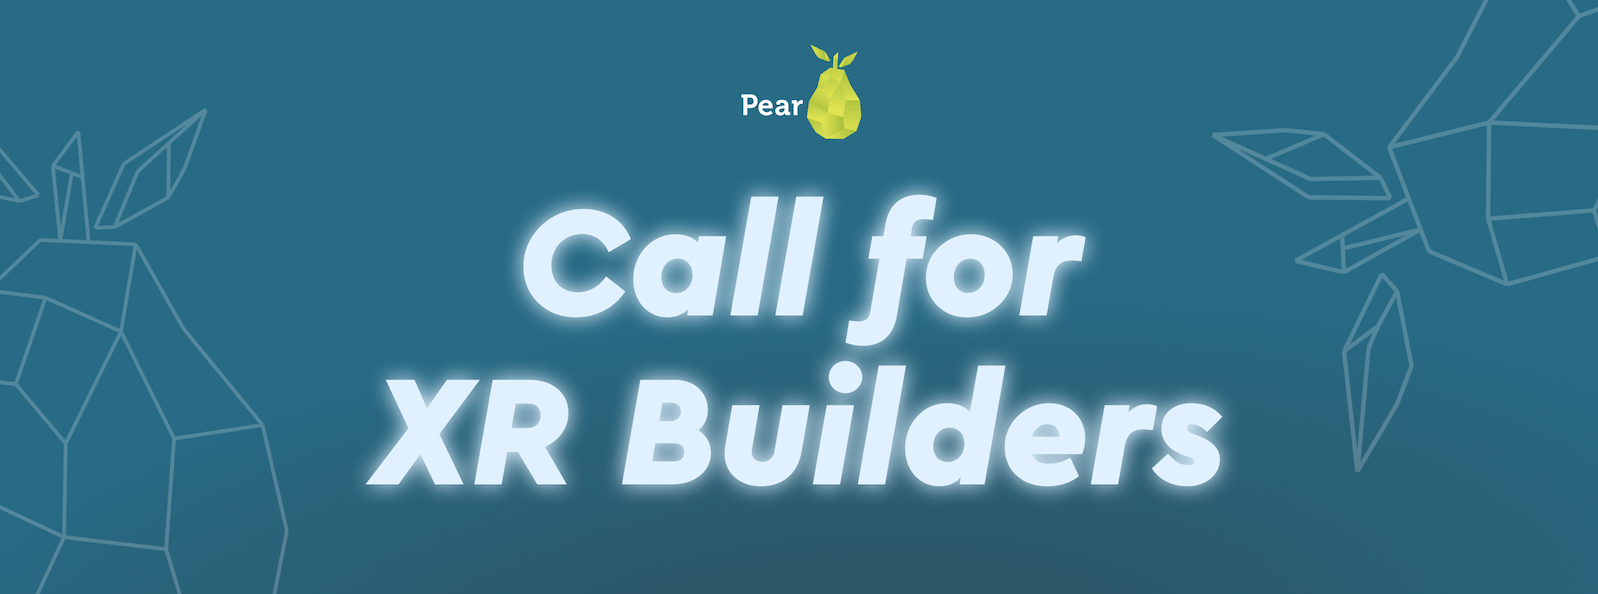 AR/VR/XR/PEAR: our call for mixed reality builders 